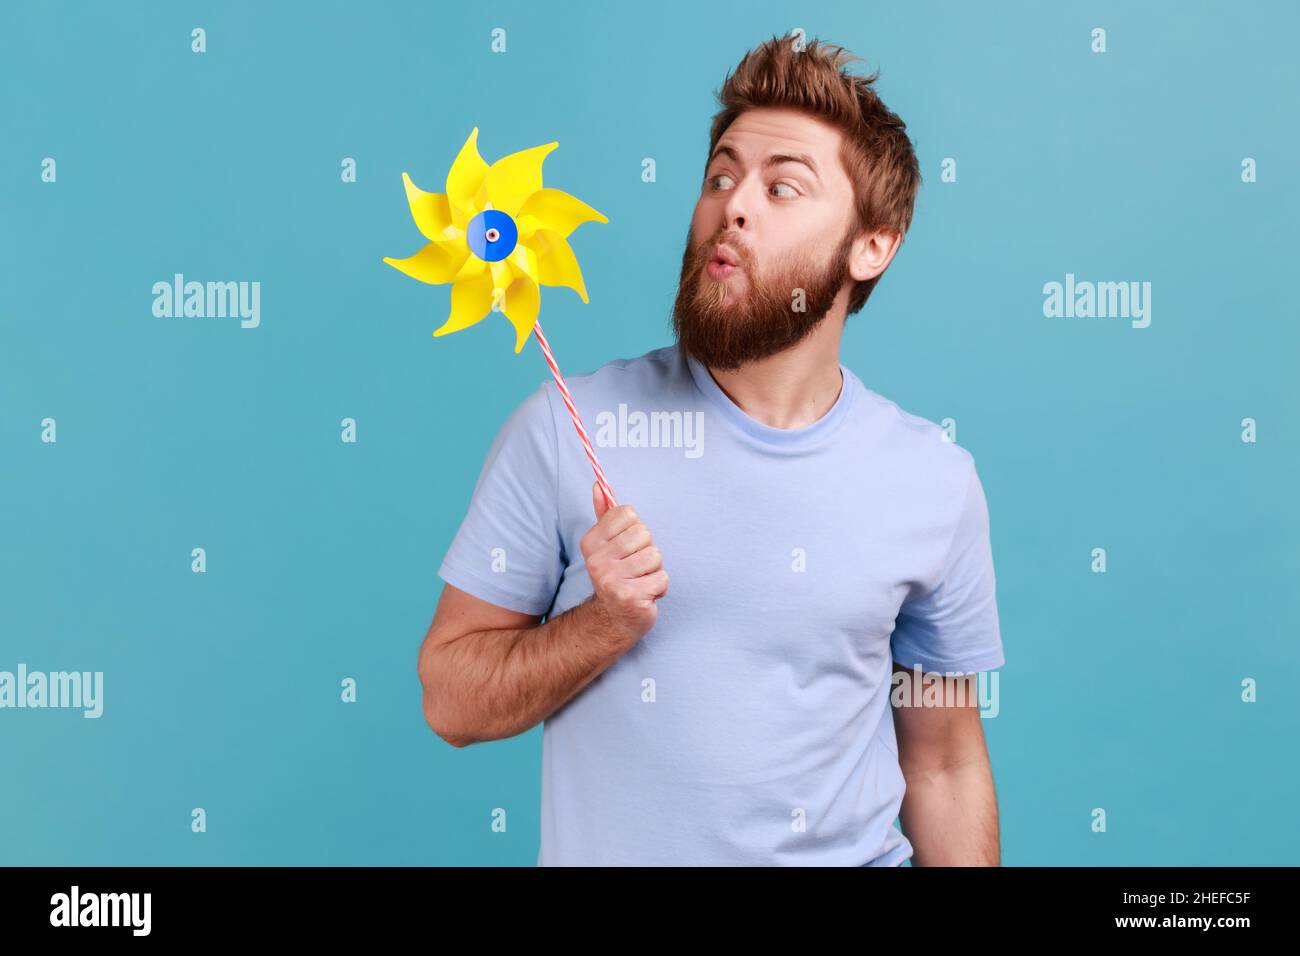 Portrait of funny positive childish handsome bearded man wearing T-shirt playing blowing yellow windmill, having fun with paper toy. Indoor studio shot isolated on blue background. Stock Photo